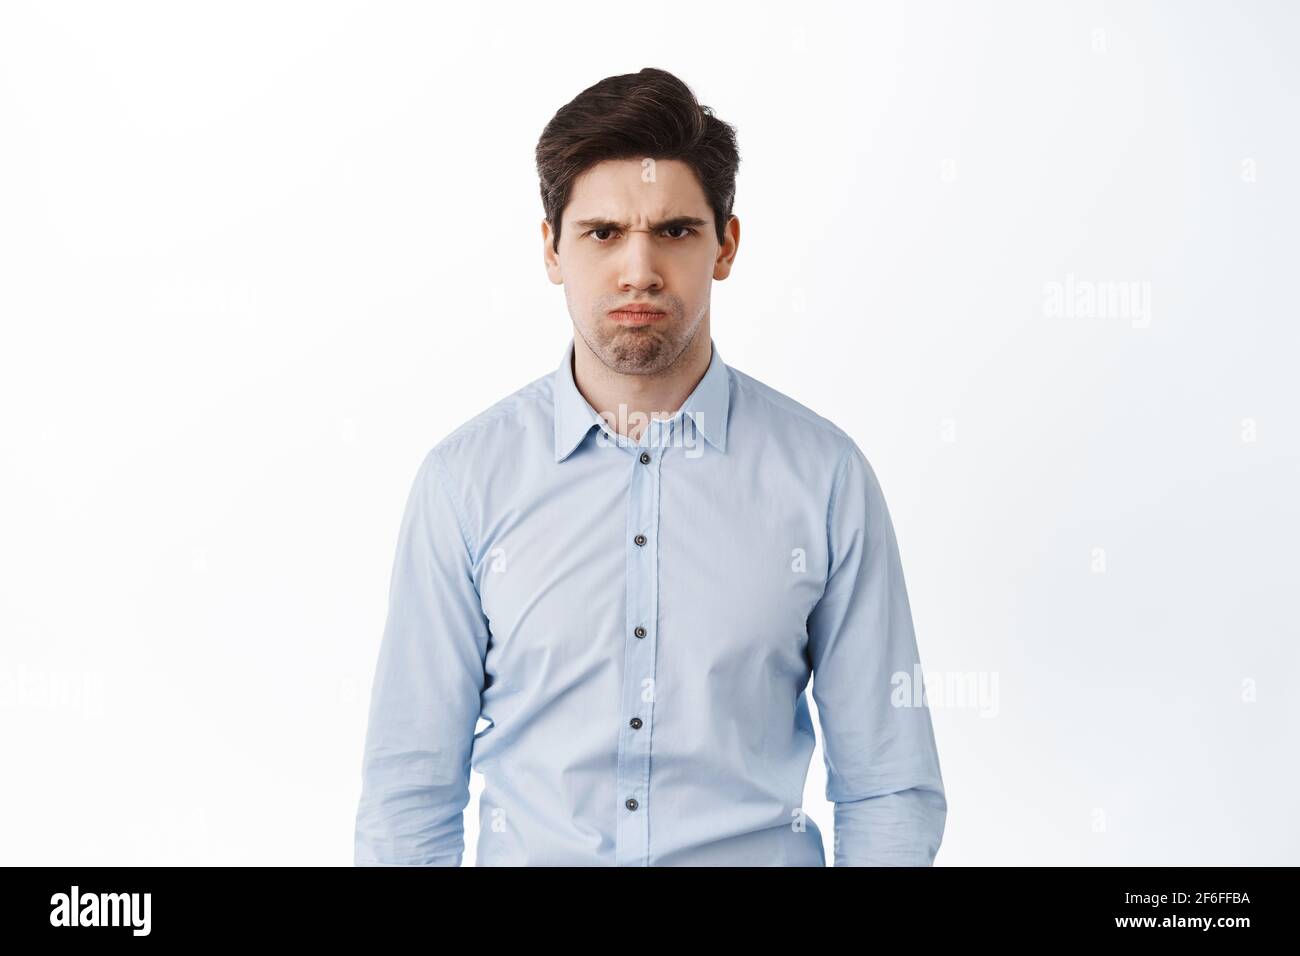 Angry and displeased office worker, frowning and looking mad, standing bothered or insulted, losing temper, boiling from anger, standing over white Stock Photo